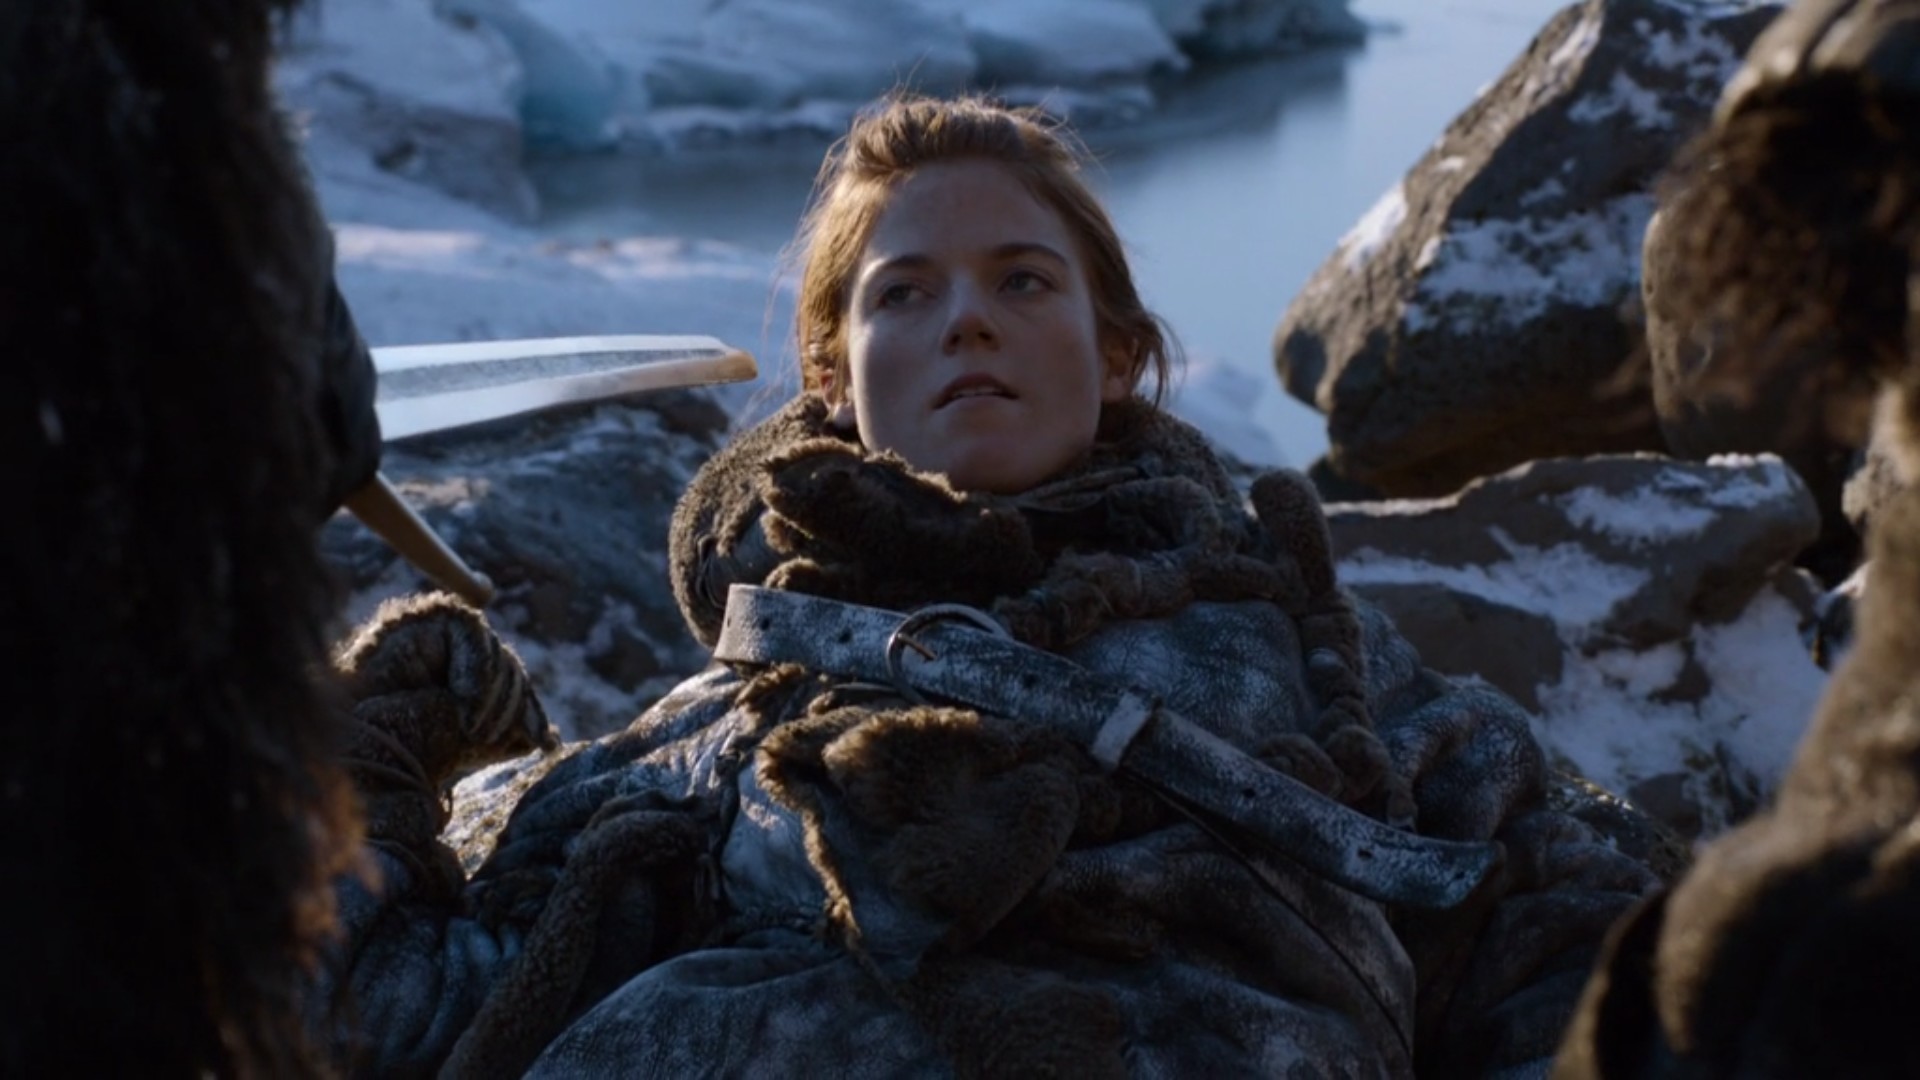 Rose Leslie: Ygritte, Game of Thrones, HBO